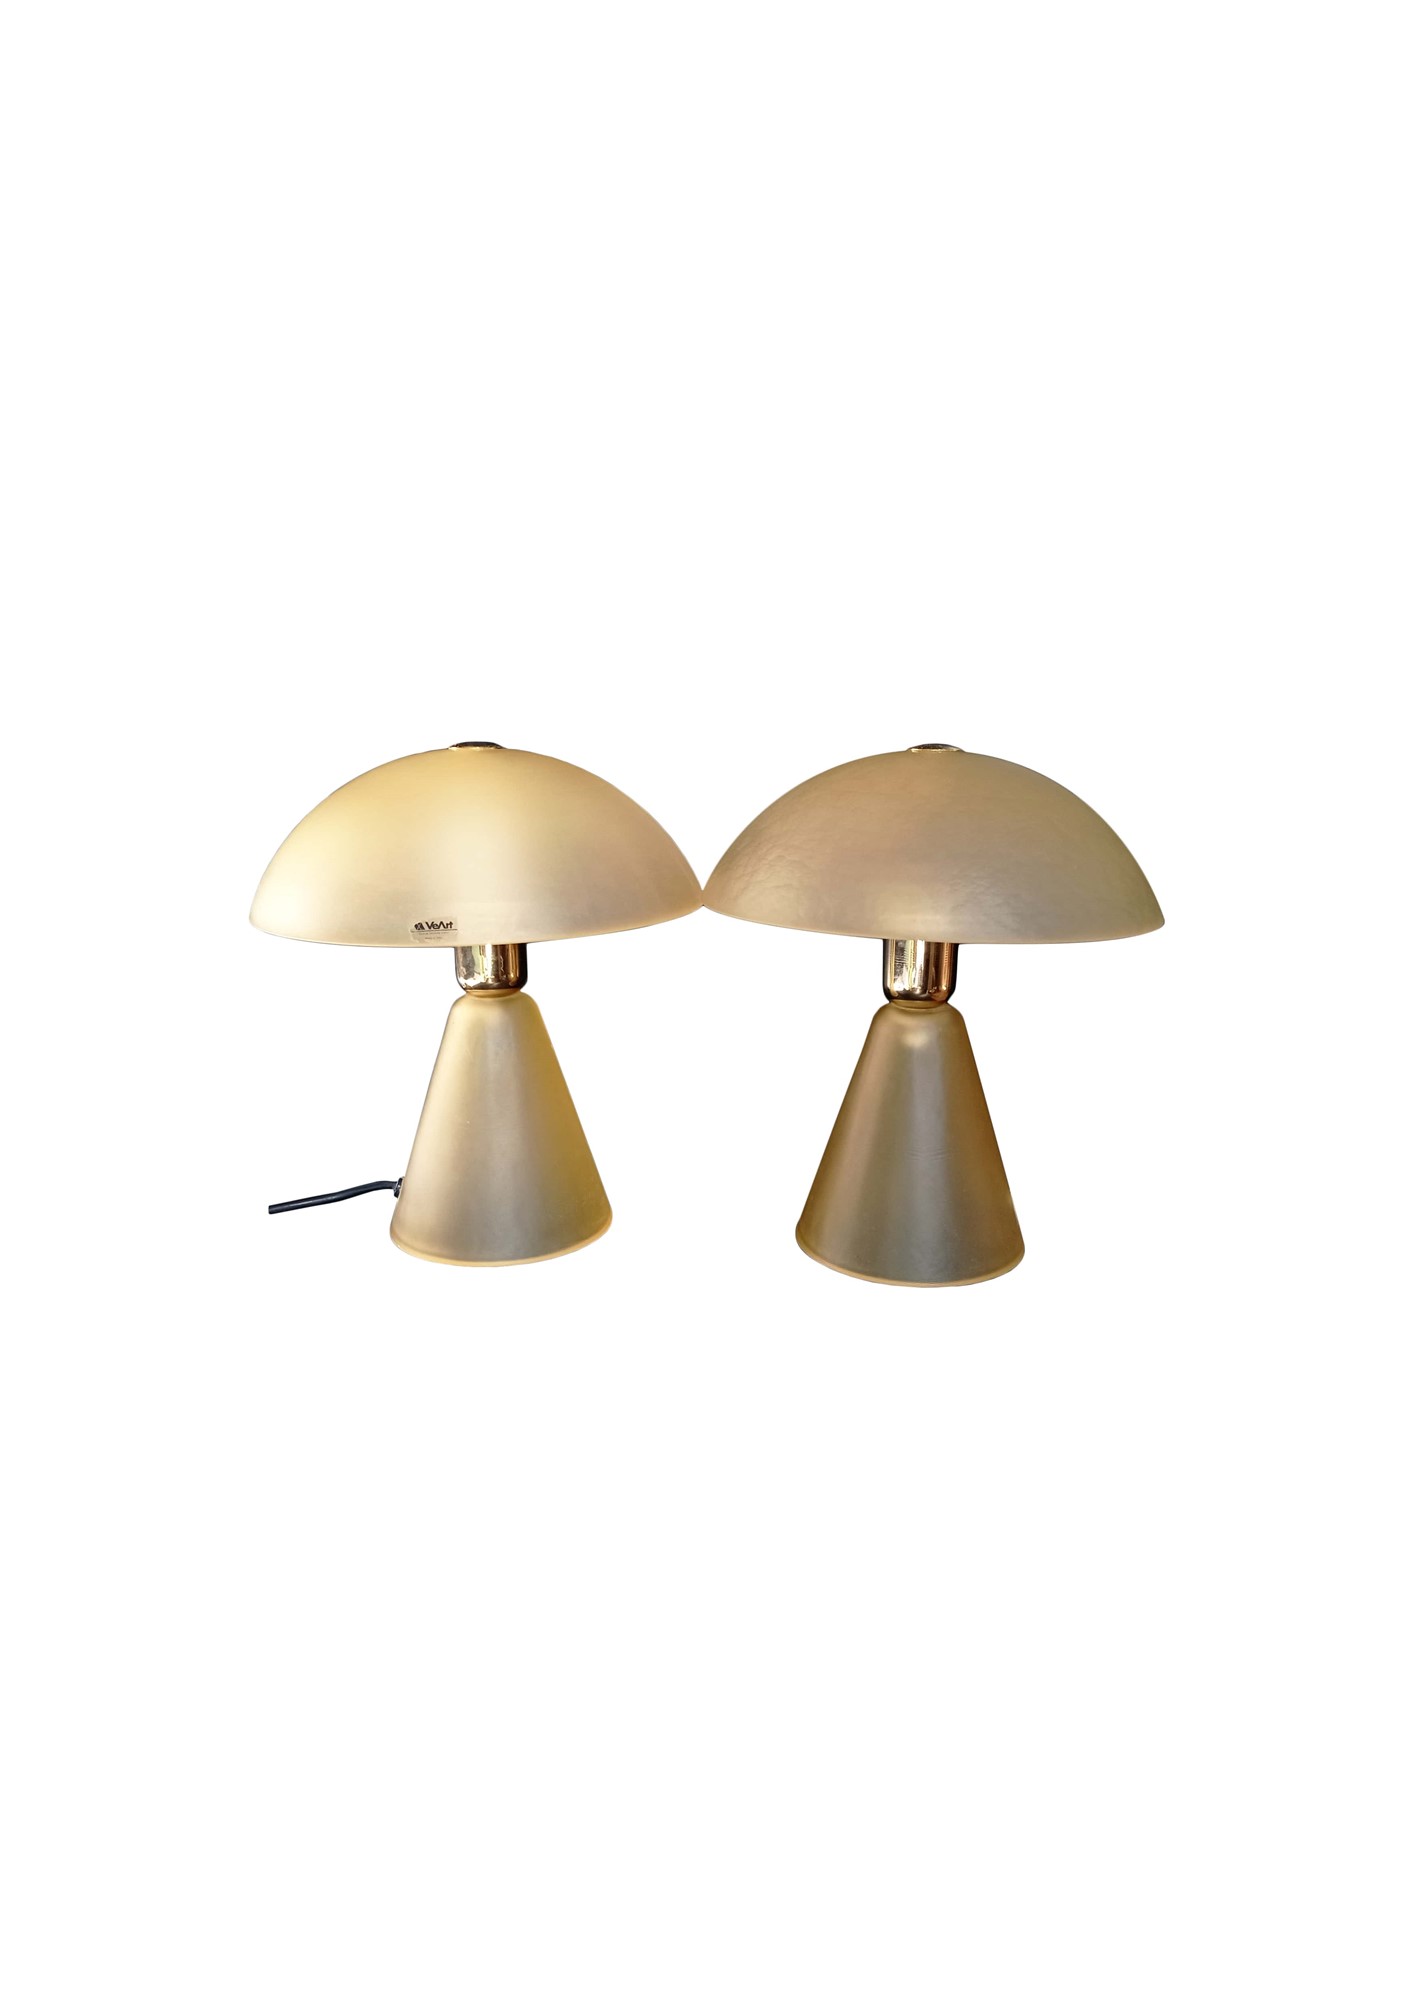 Set of two table lamps - Image 4 of 5